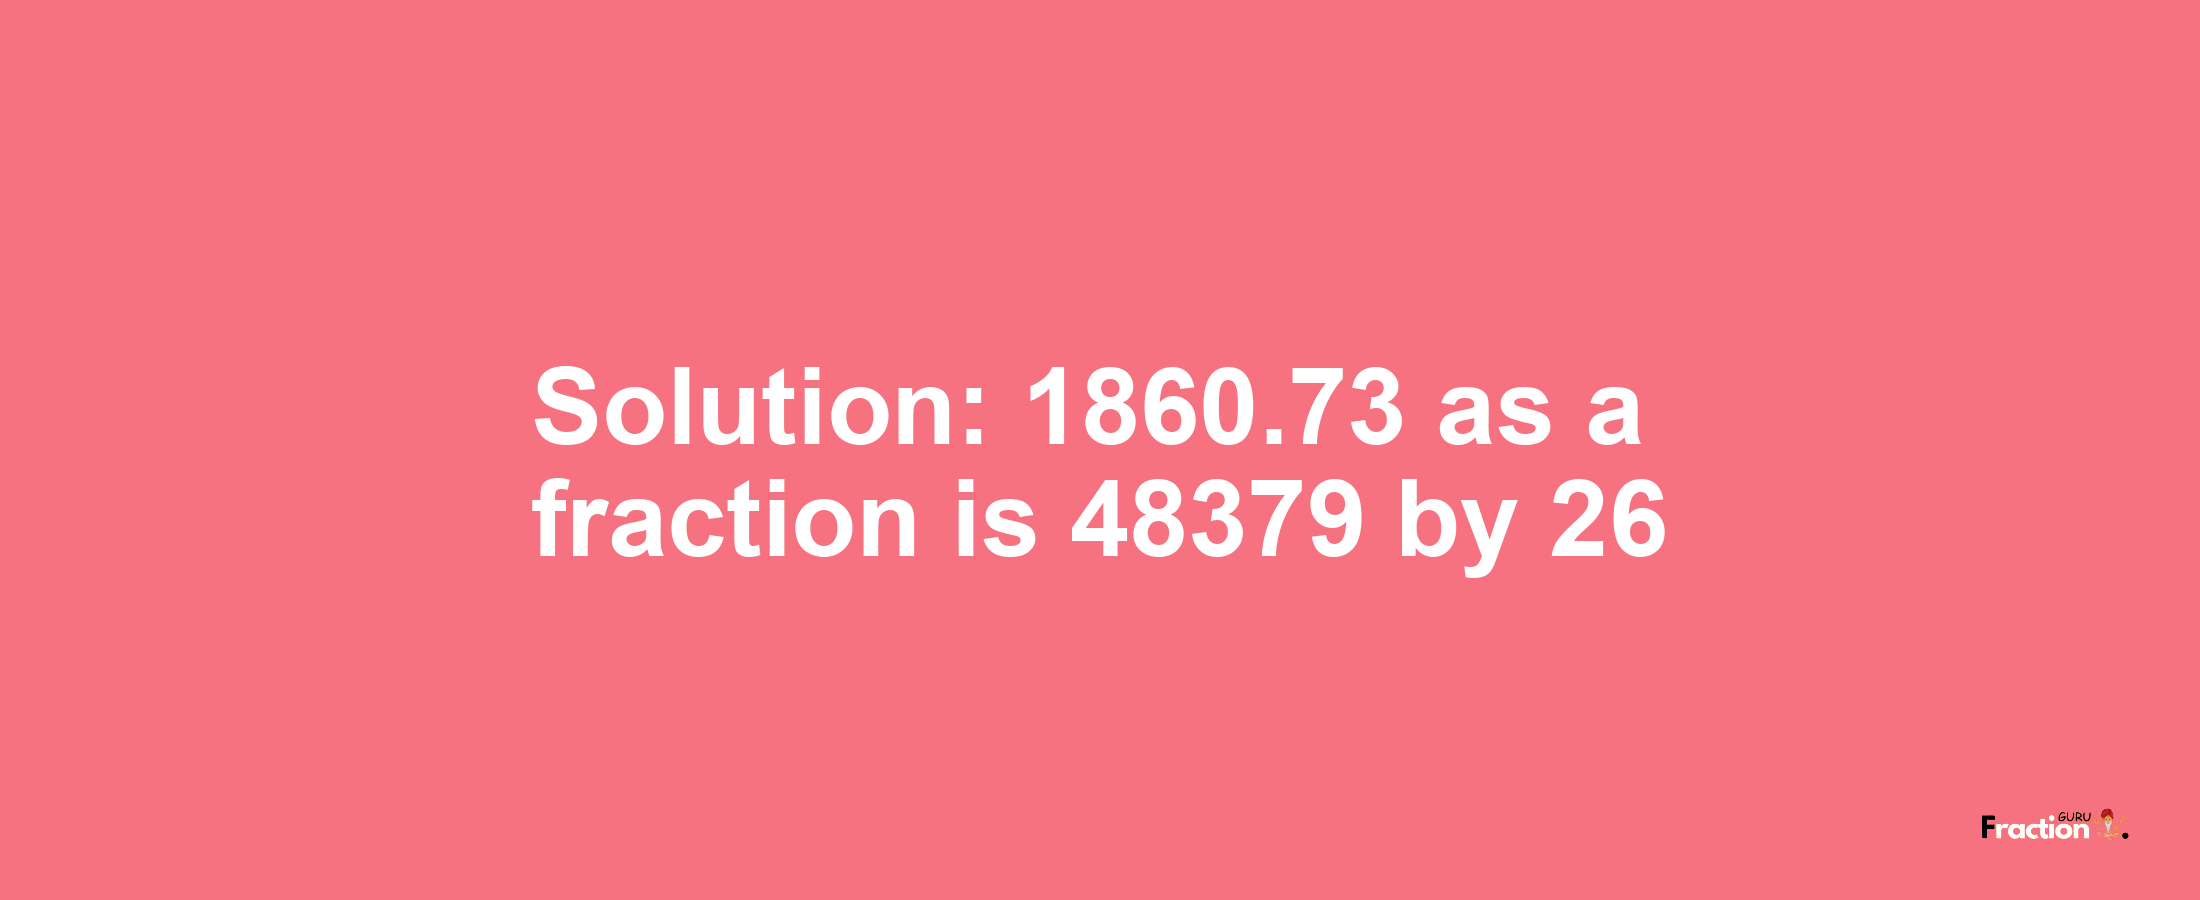 Solution:1860.73 as a fraction is 48379/26